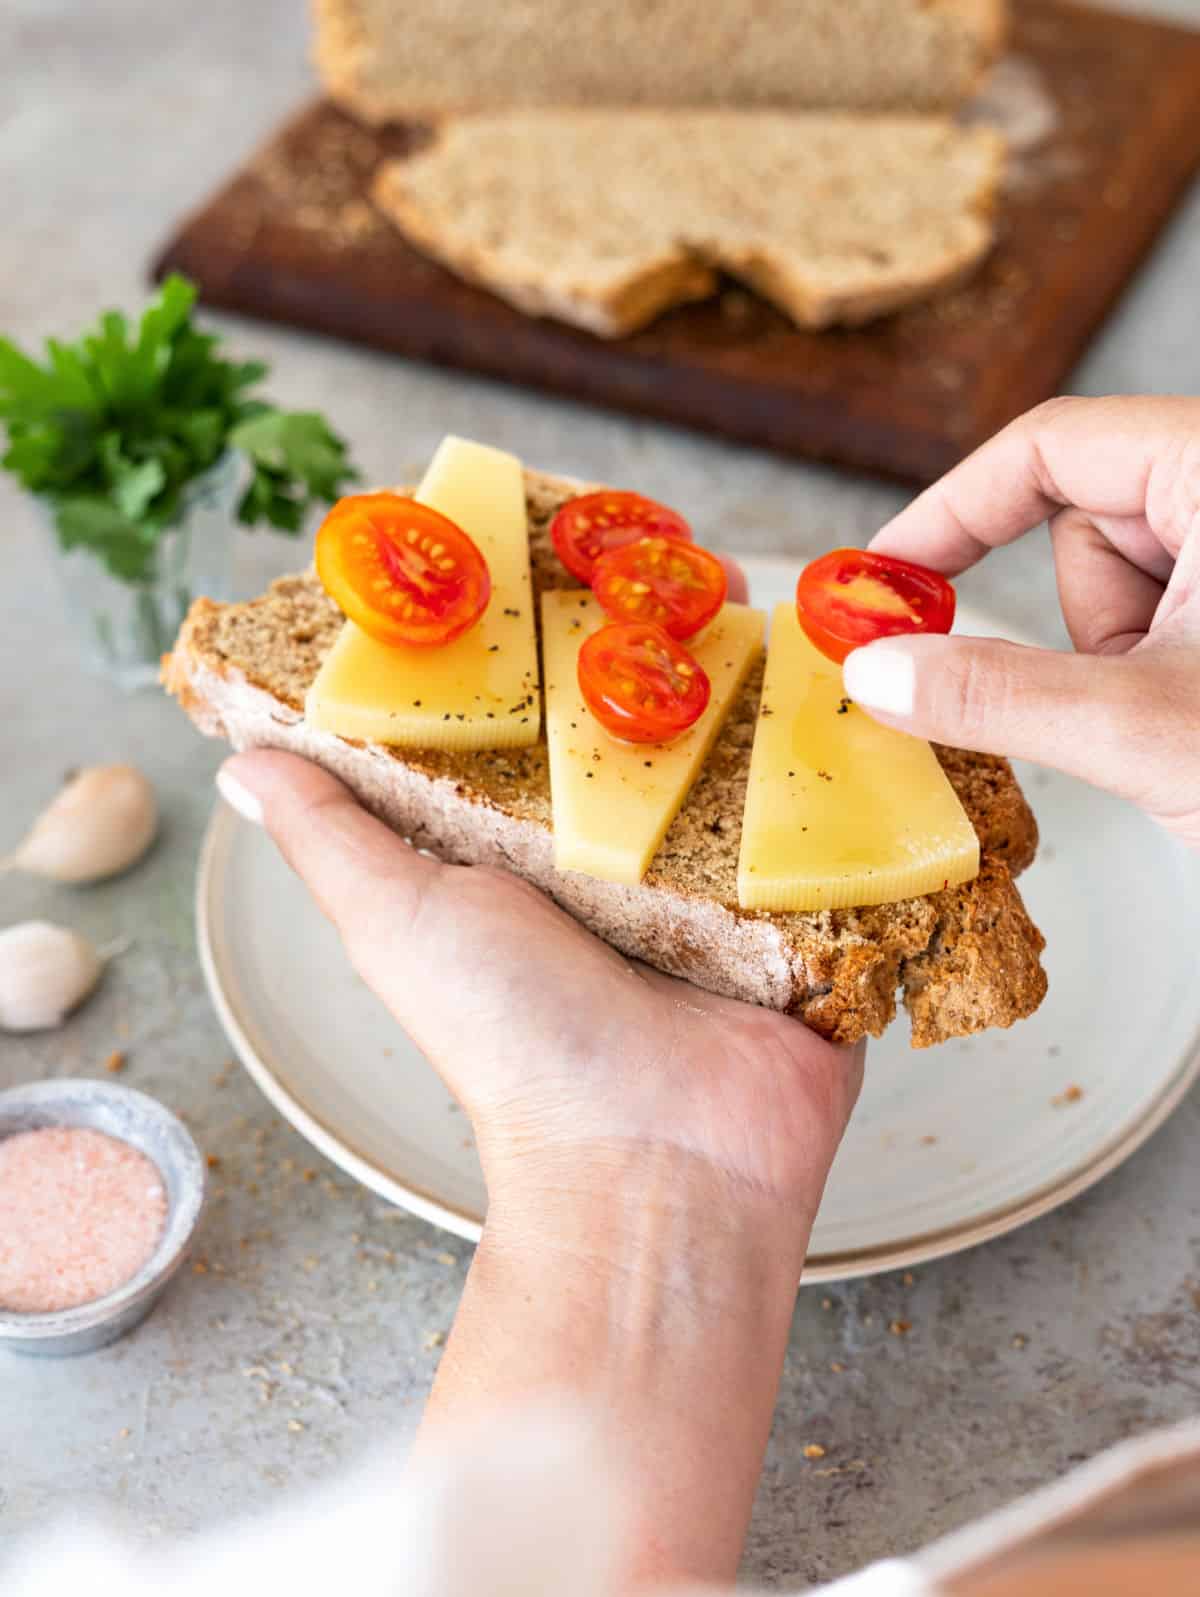 Adding cherry tomato halves to a slice of whole wheat bread with cheese being held.